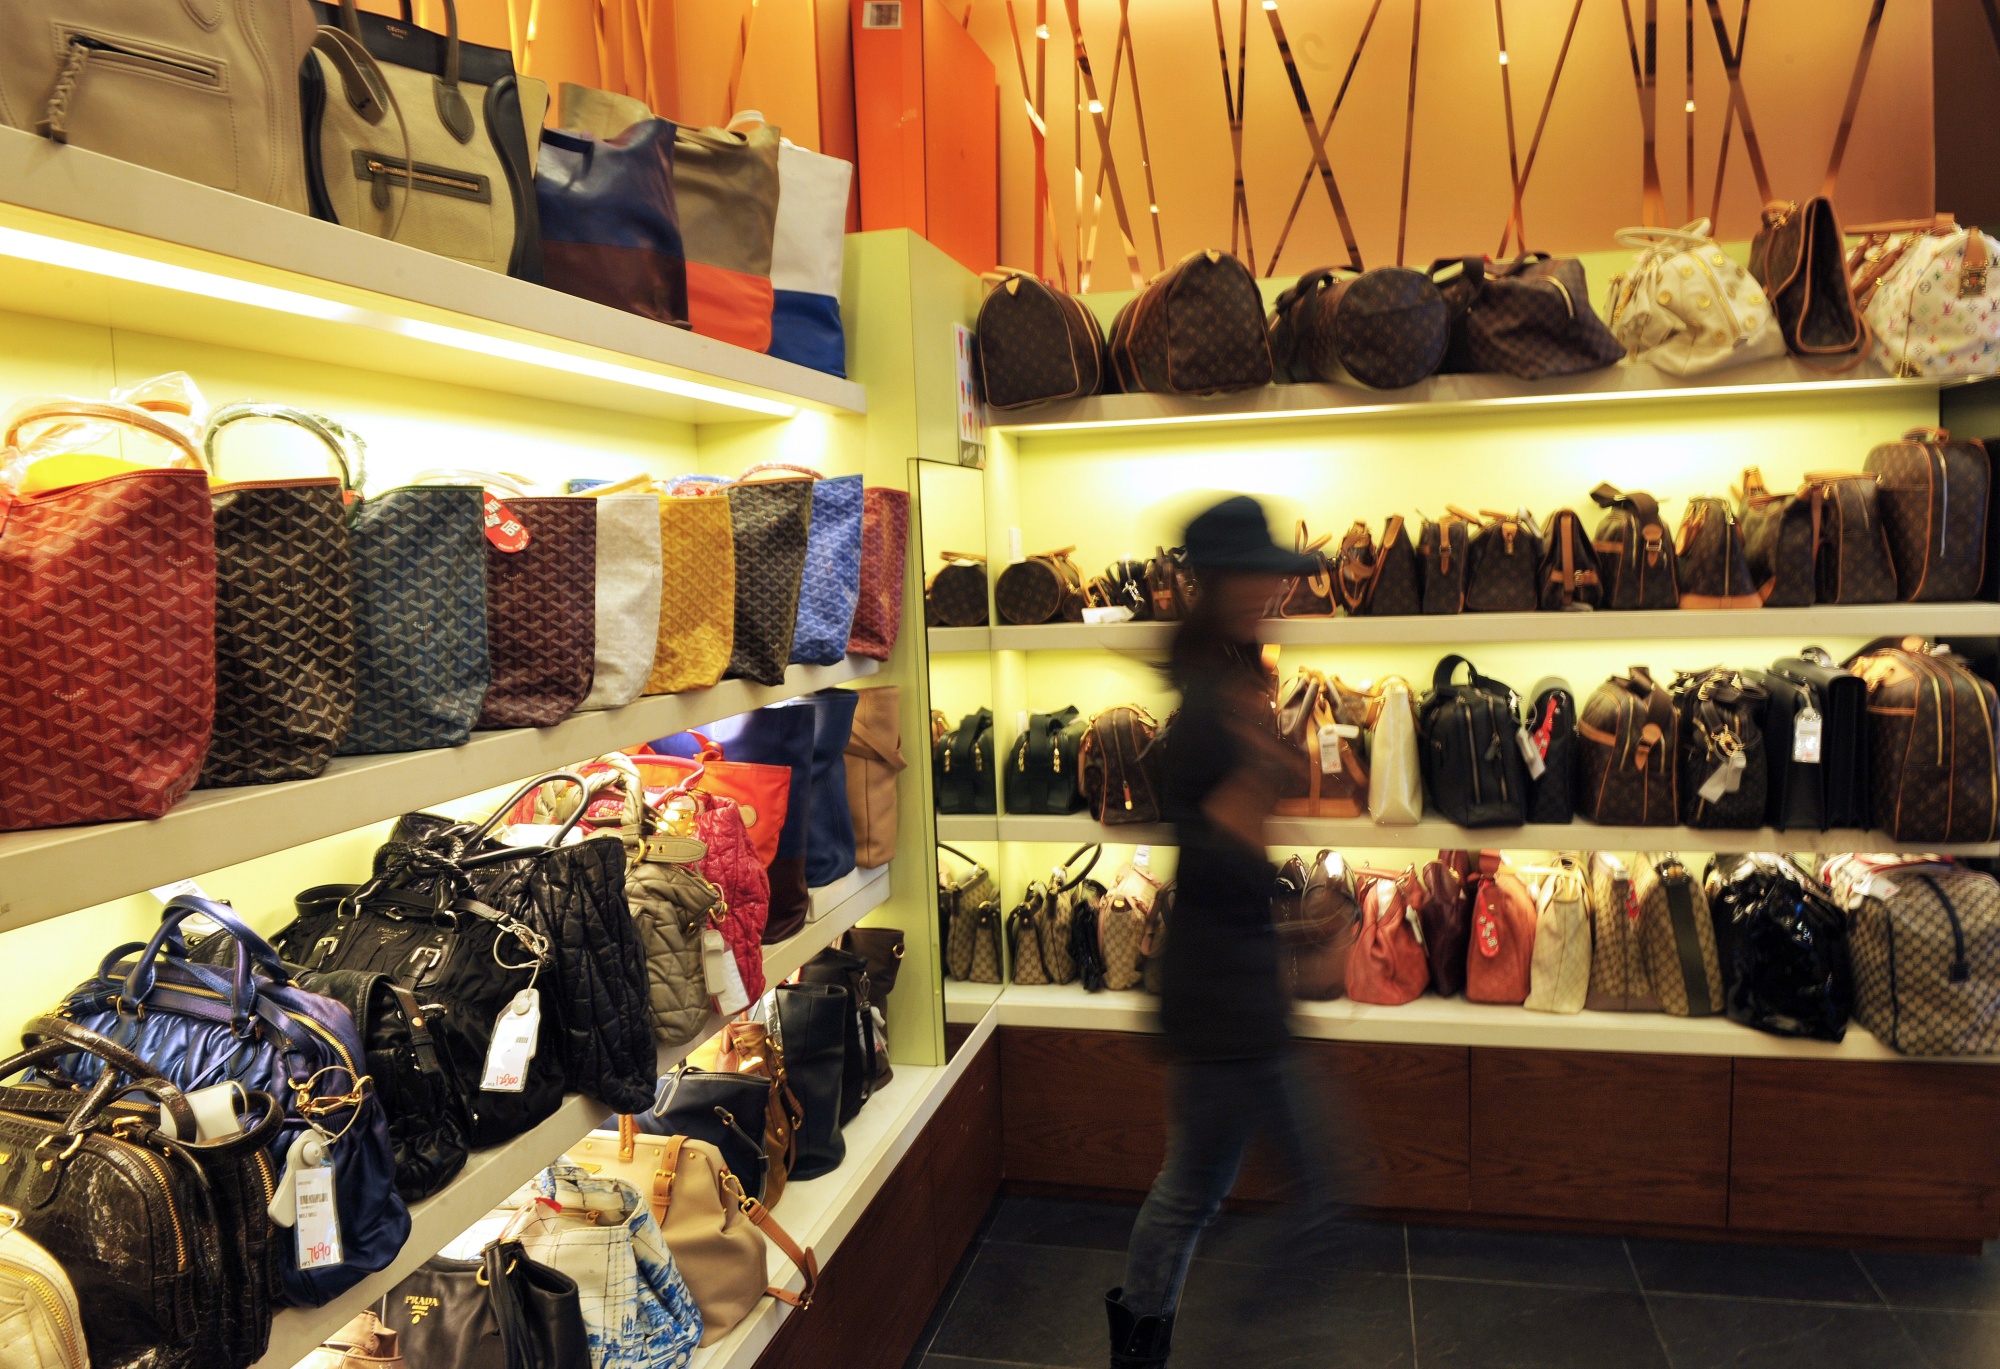 Secondhand Luxury Goods: A First-Rate Strategic Opportunity